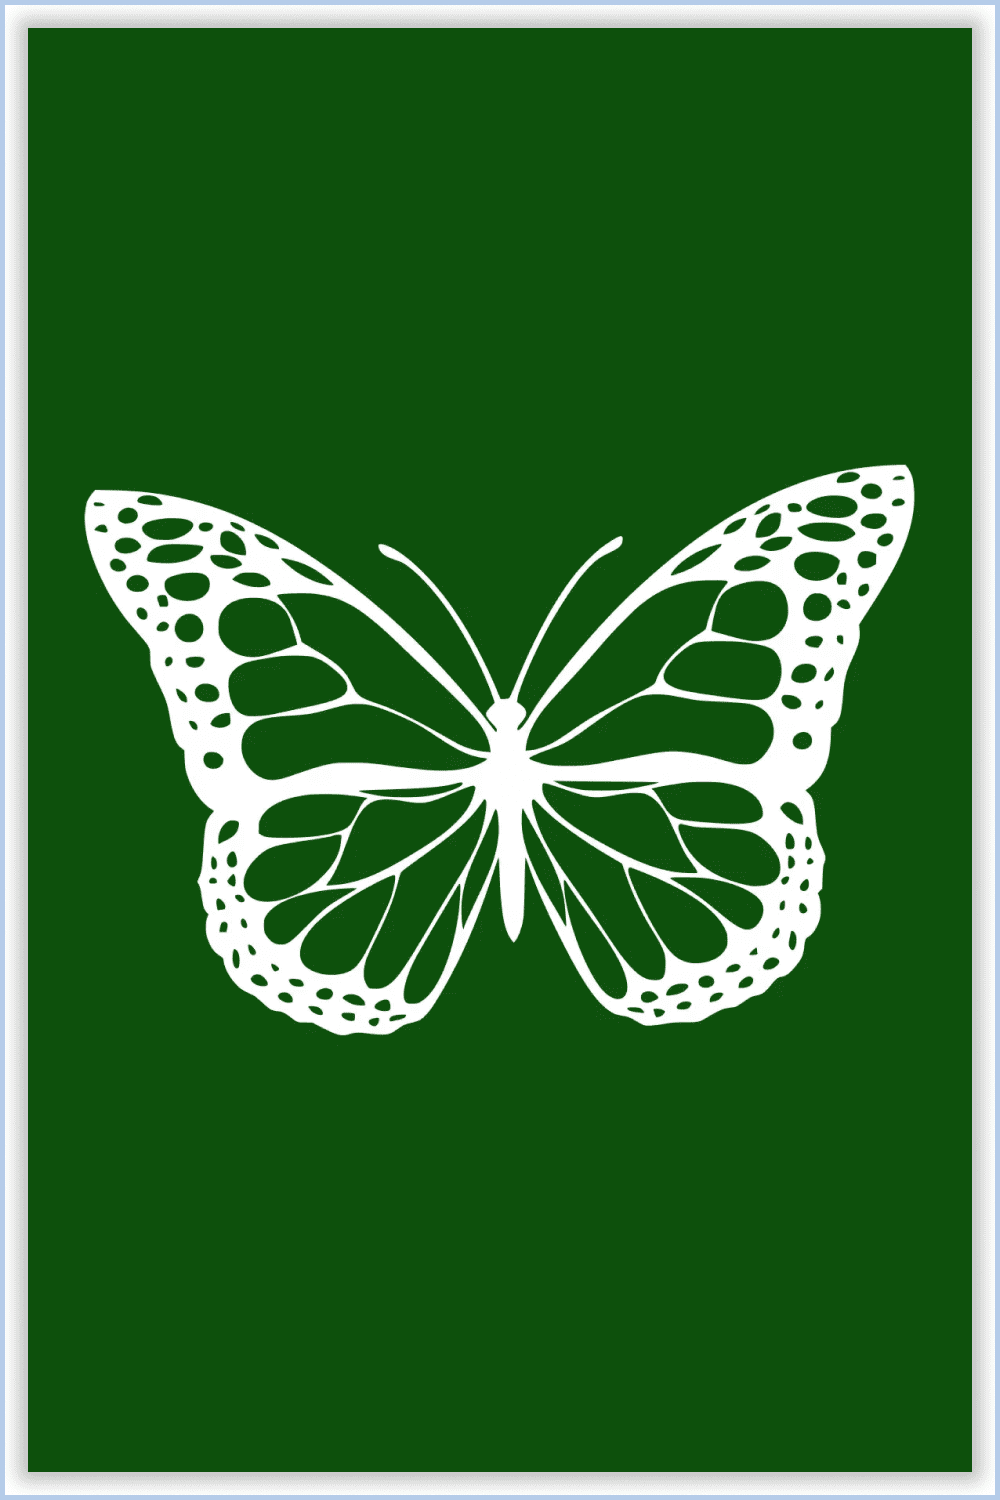 Butterfly white color with membranous wings on a green background.